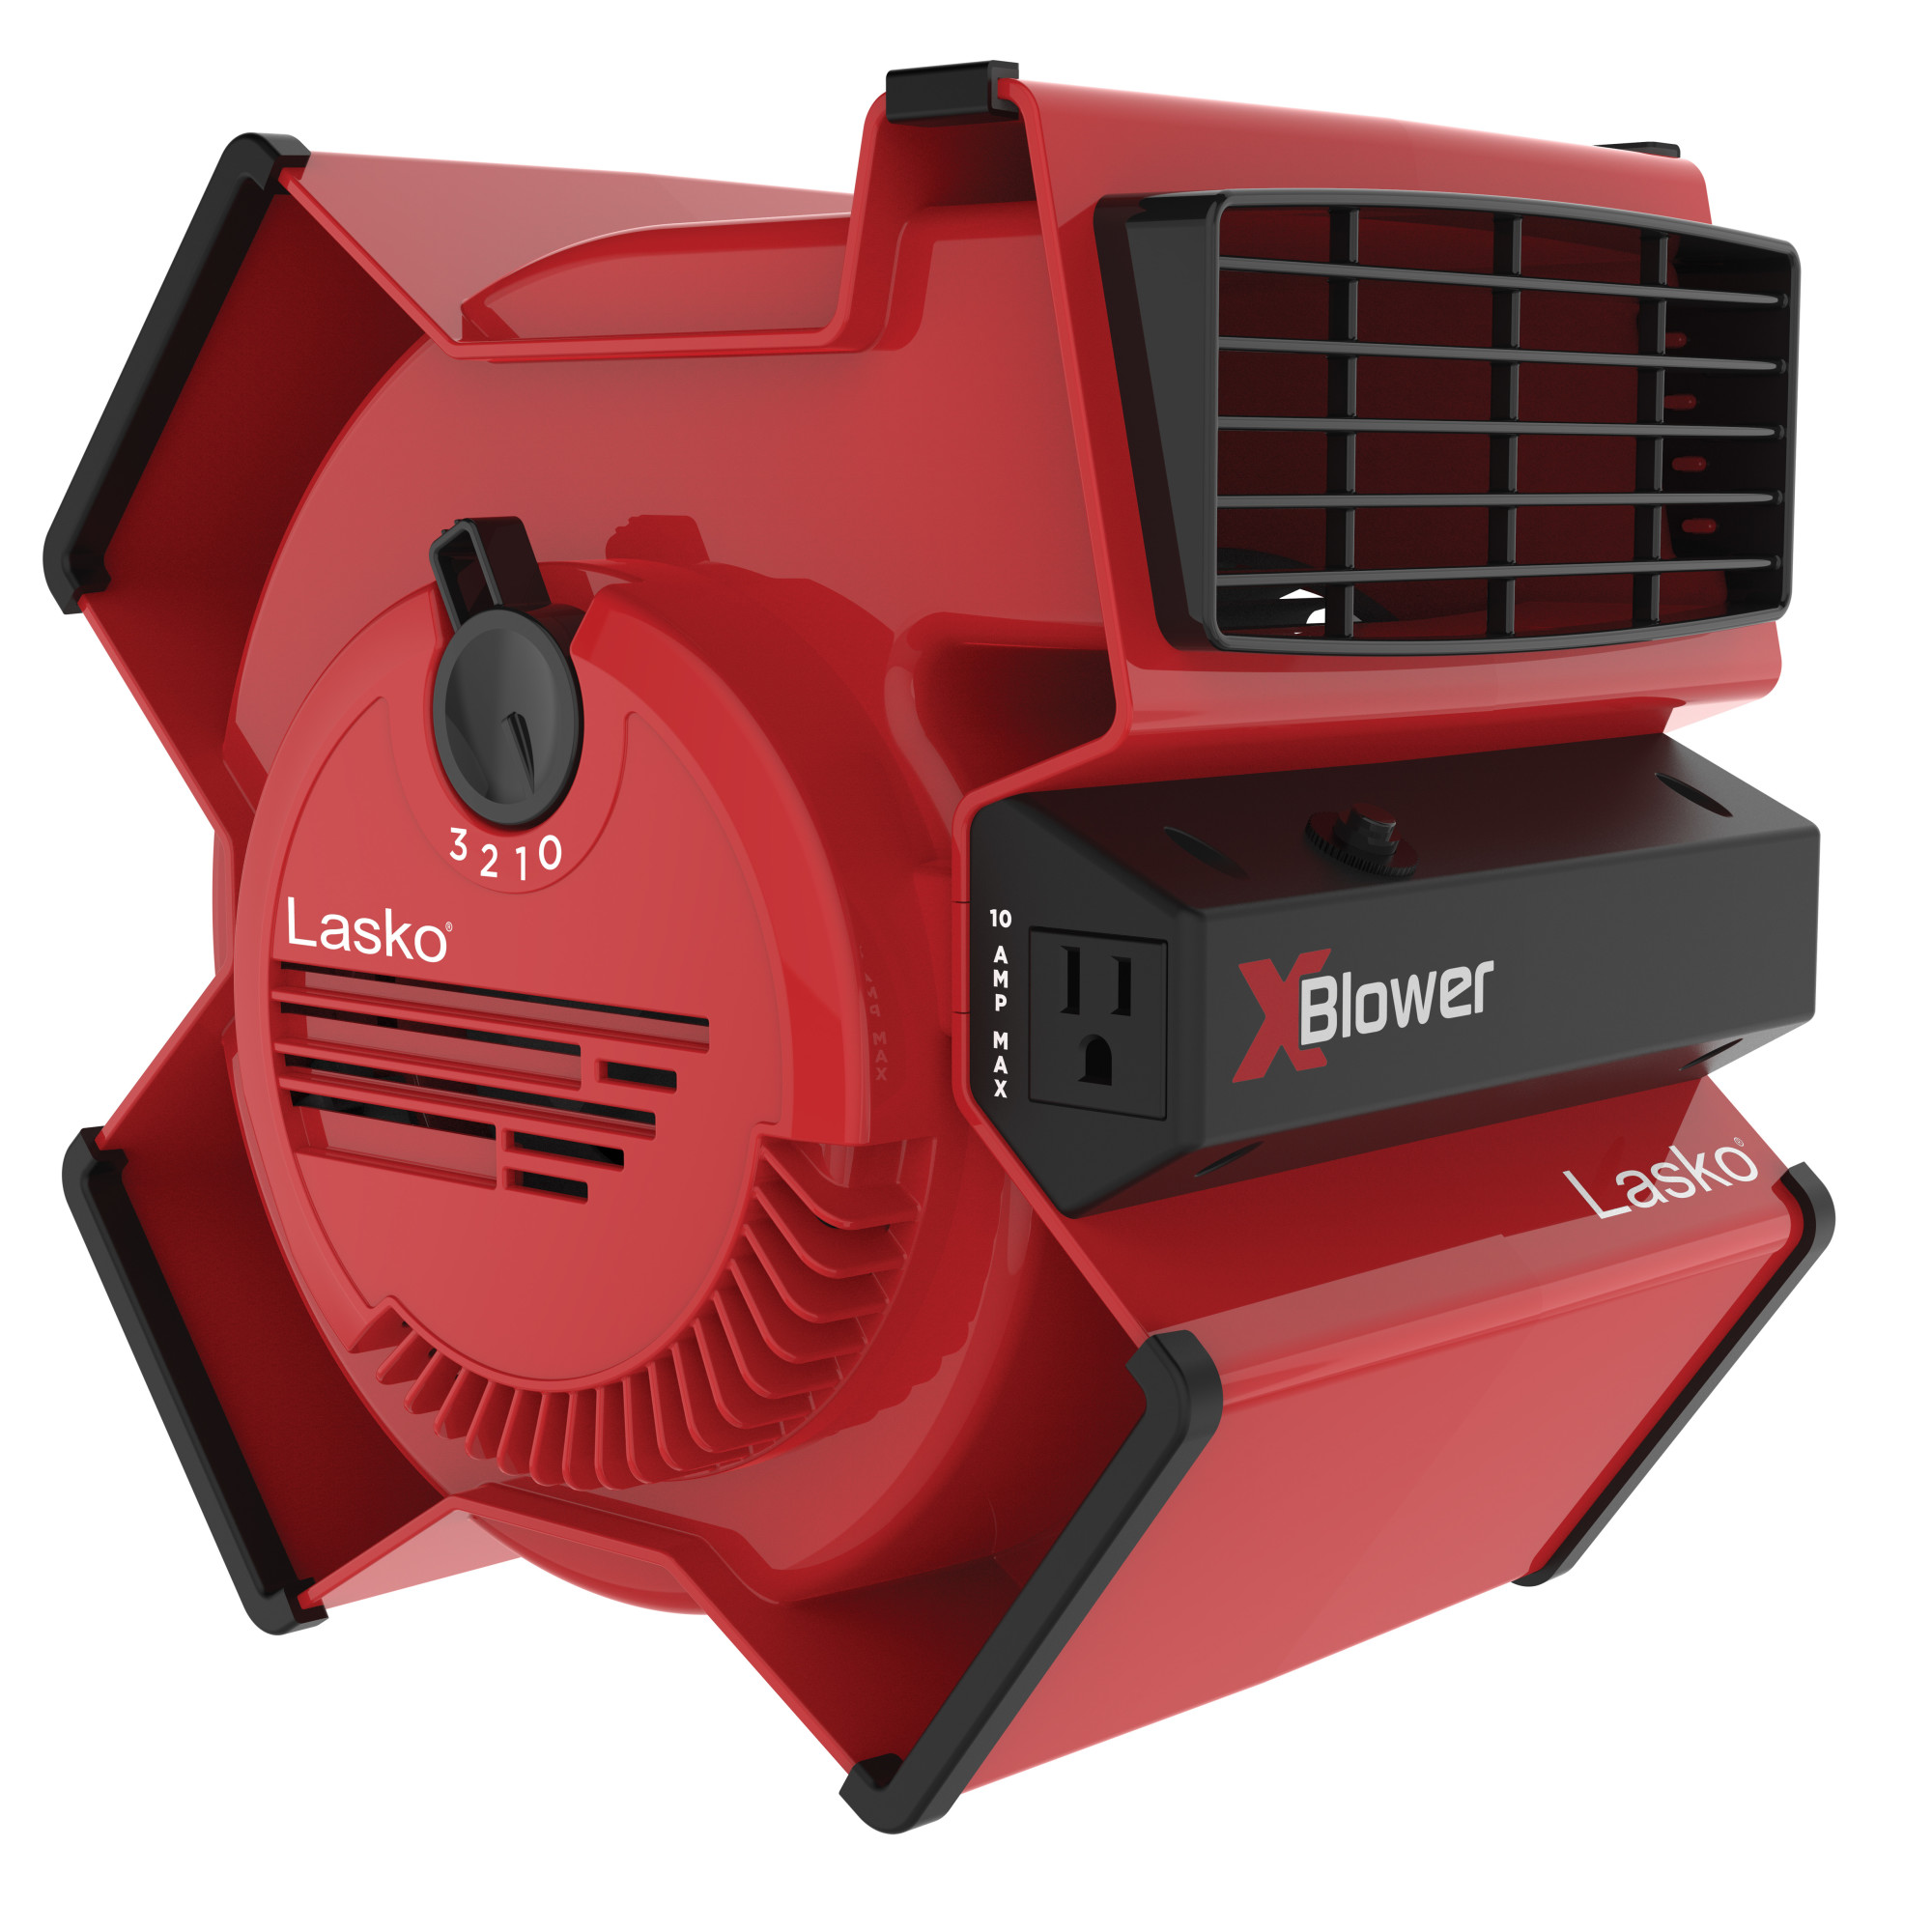 Lasko 11" X-Blower Multi-Position Utility Blower Fan with USB Port, Red, X12900, New - image 1 of 5